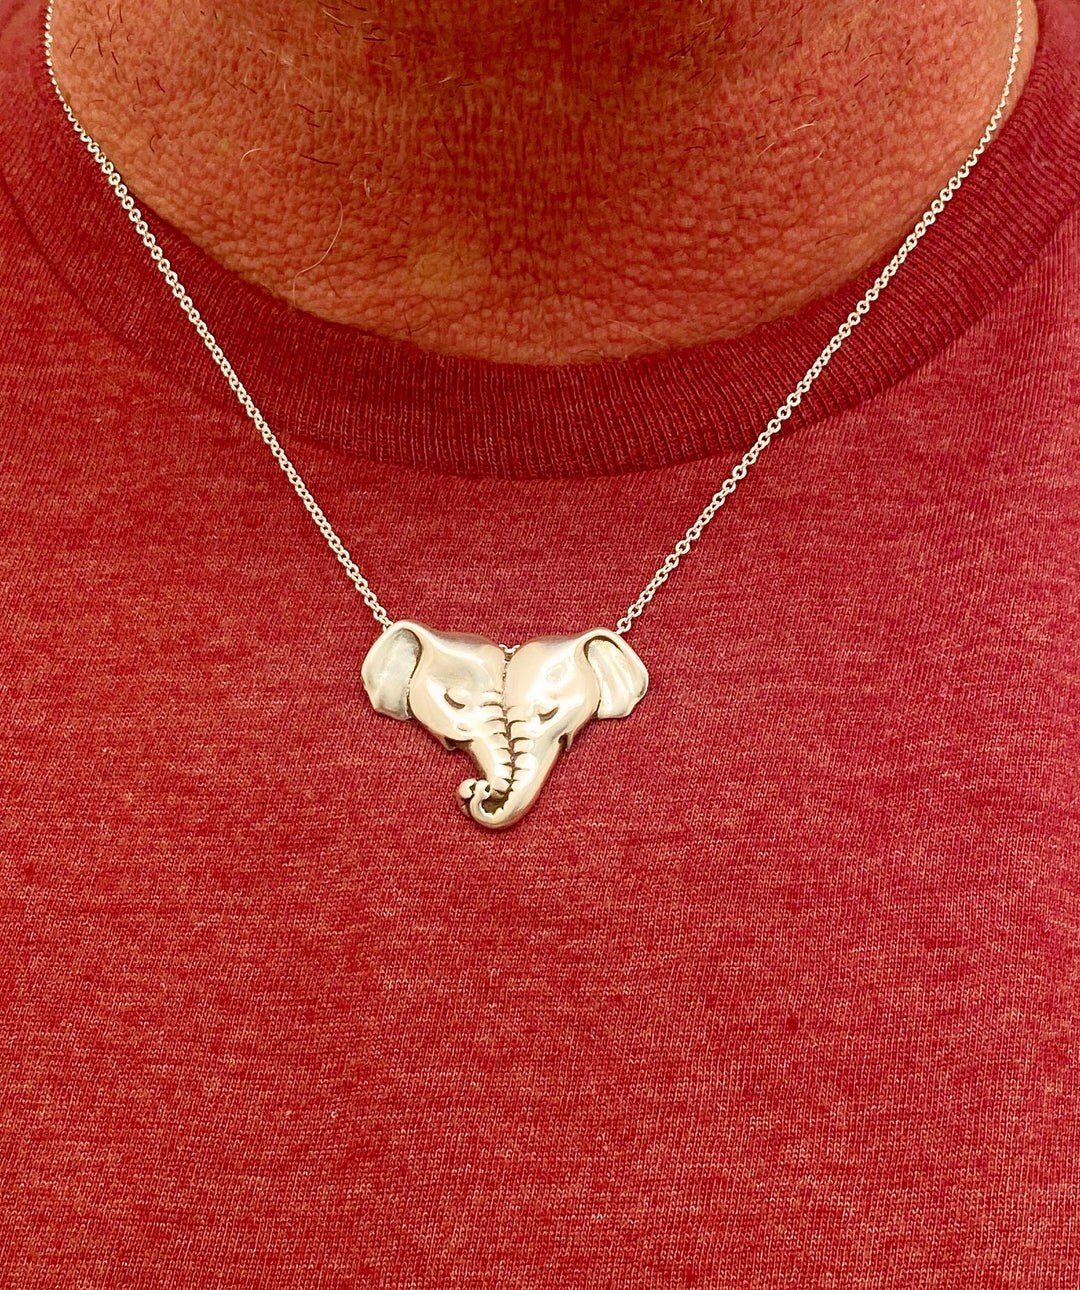 Love Nose Necklace - Sterling Silver Pendant | All Natural Arts